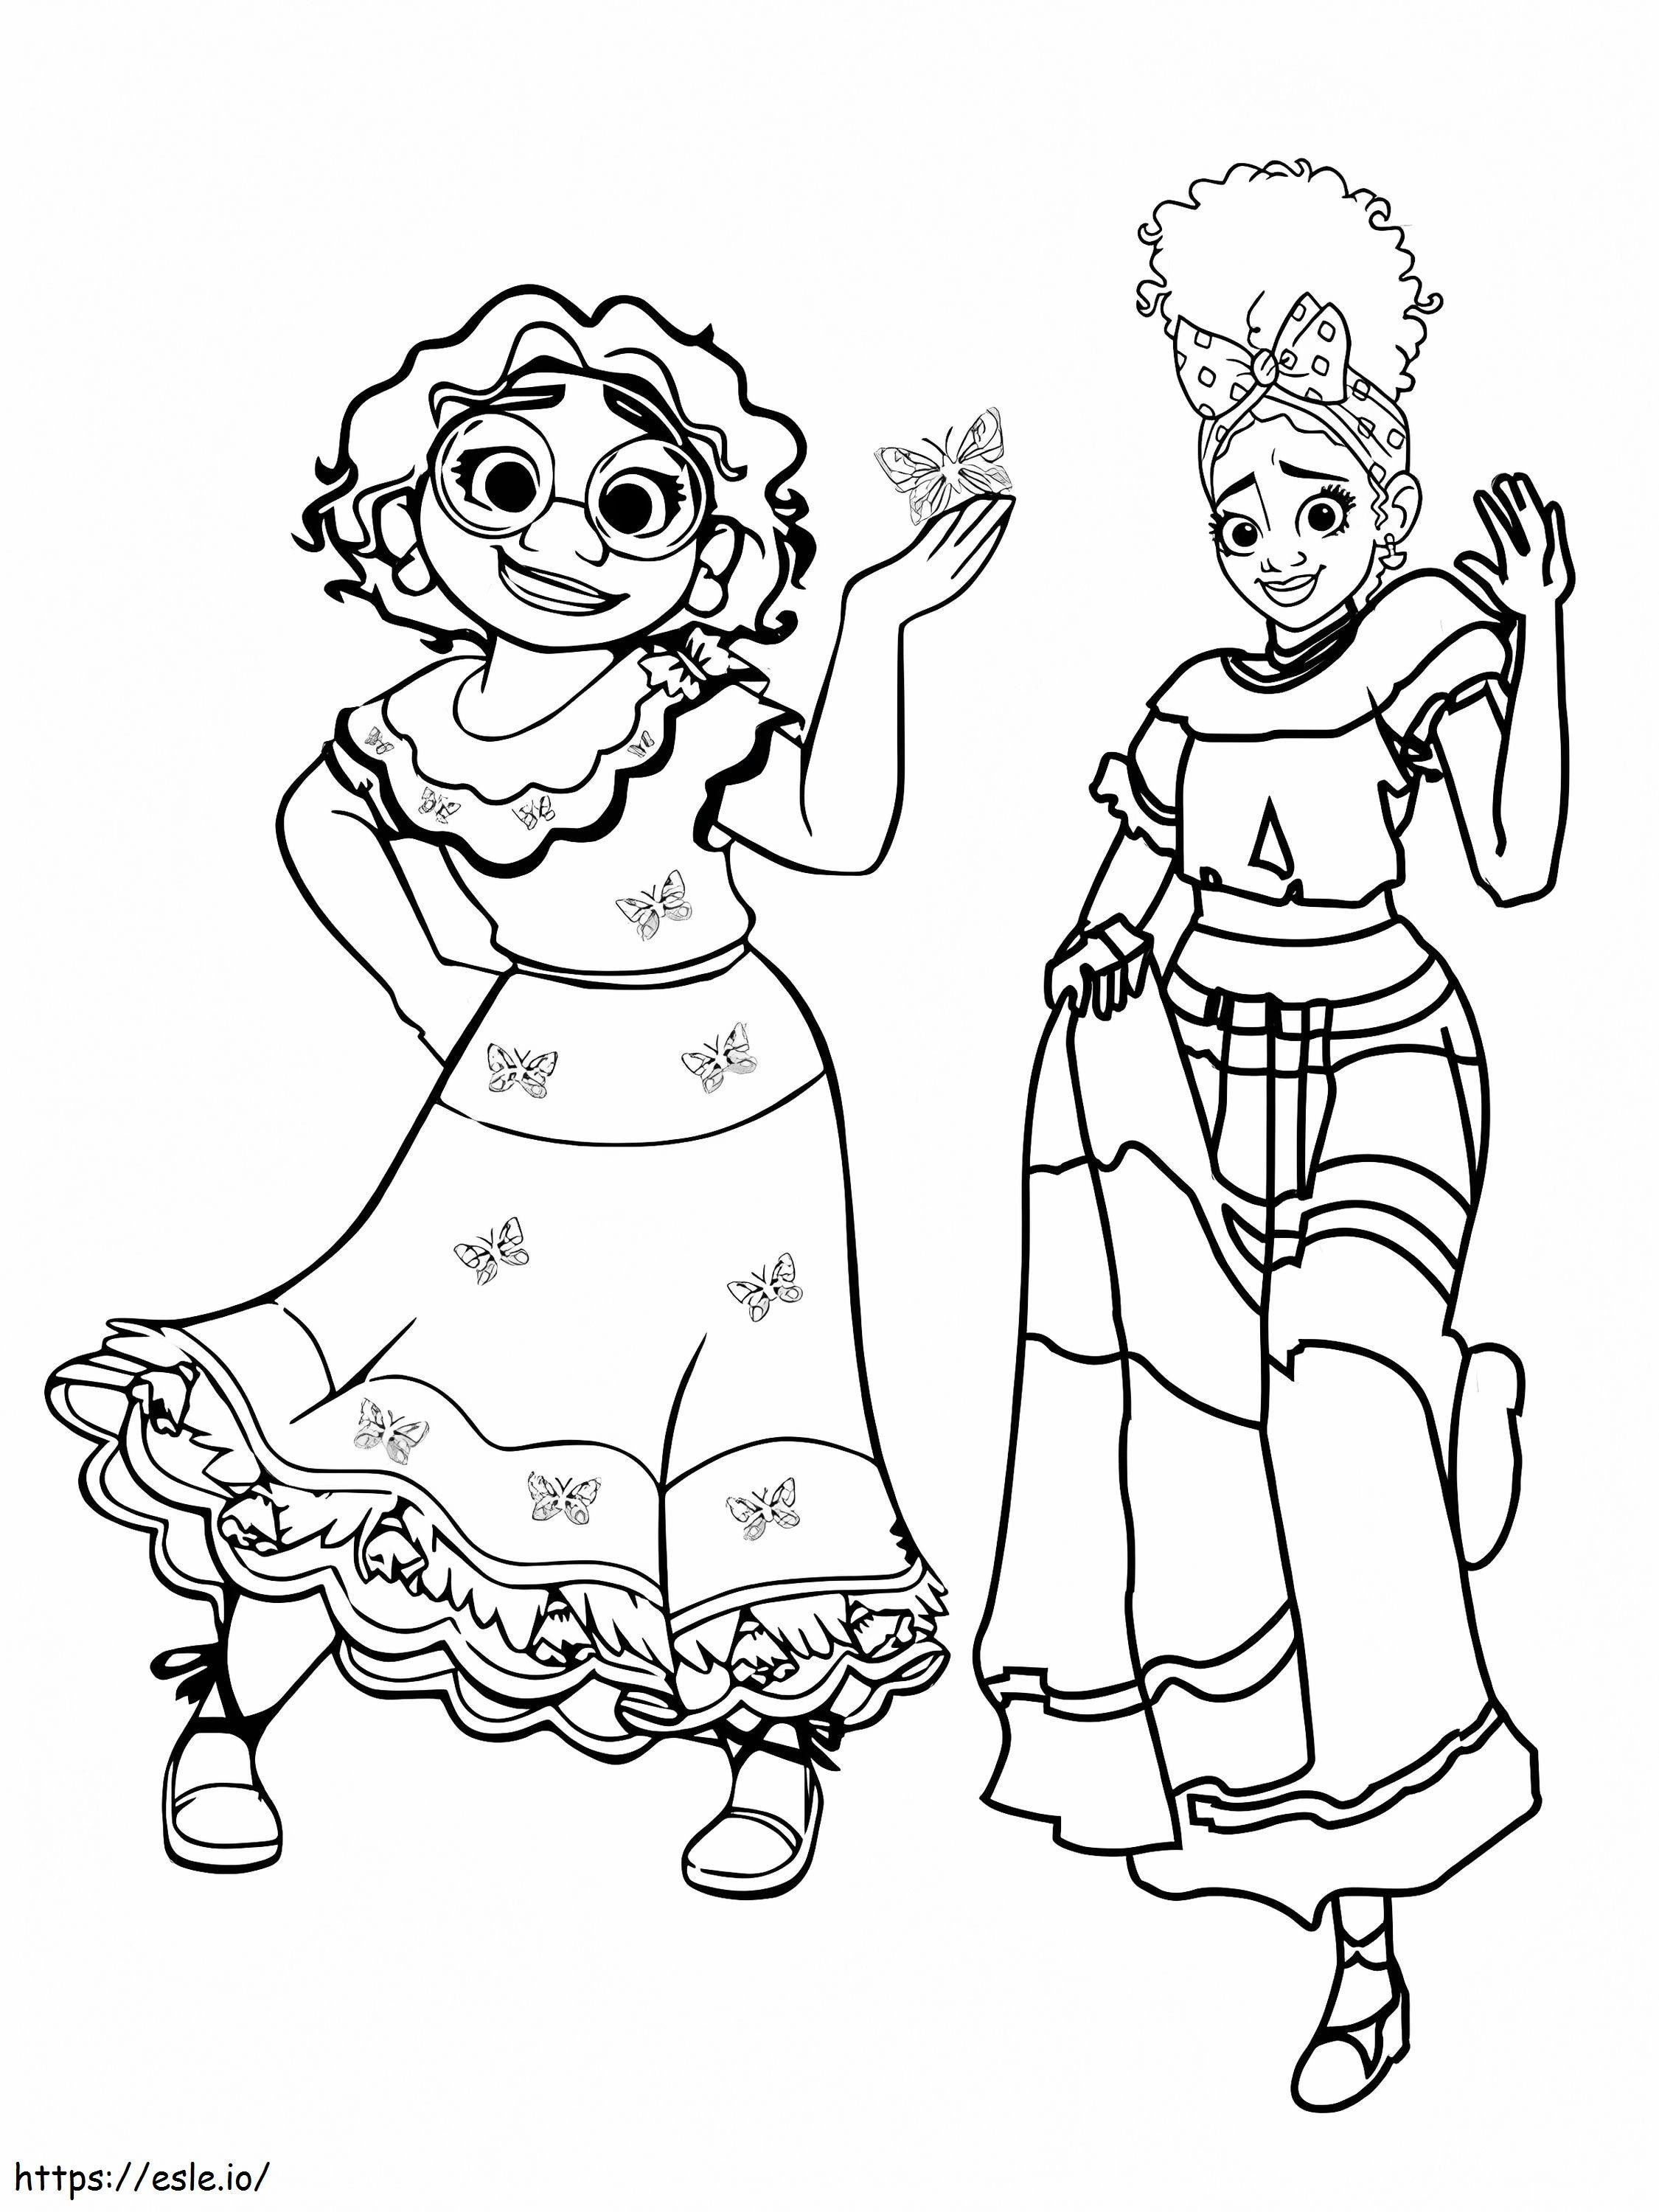 Charm Dolores And Mirabel coloring page